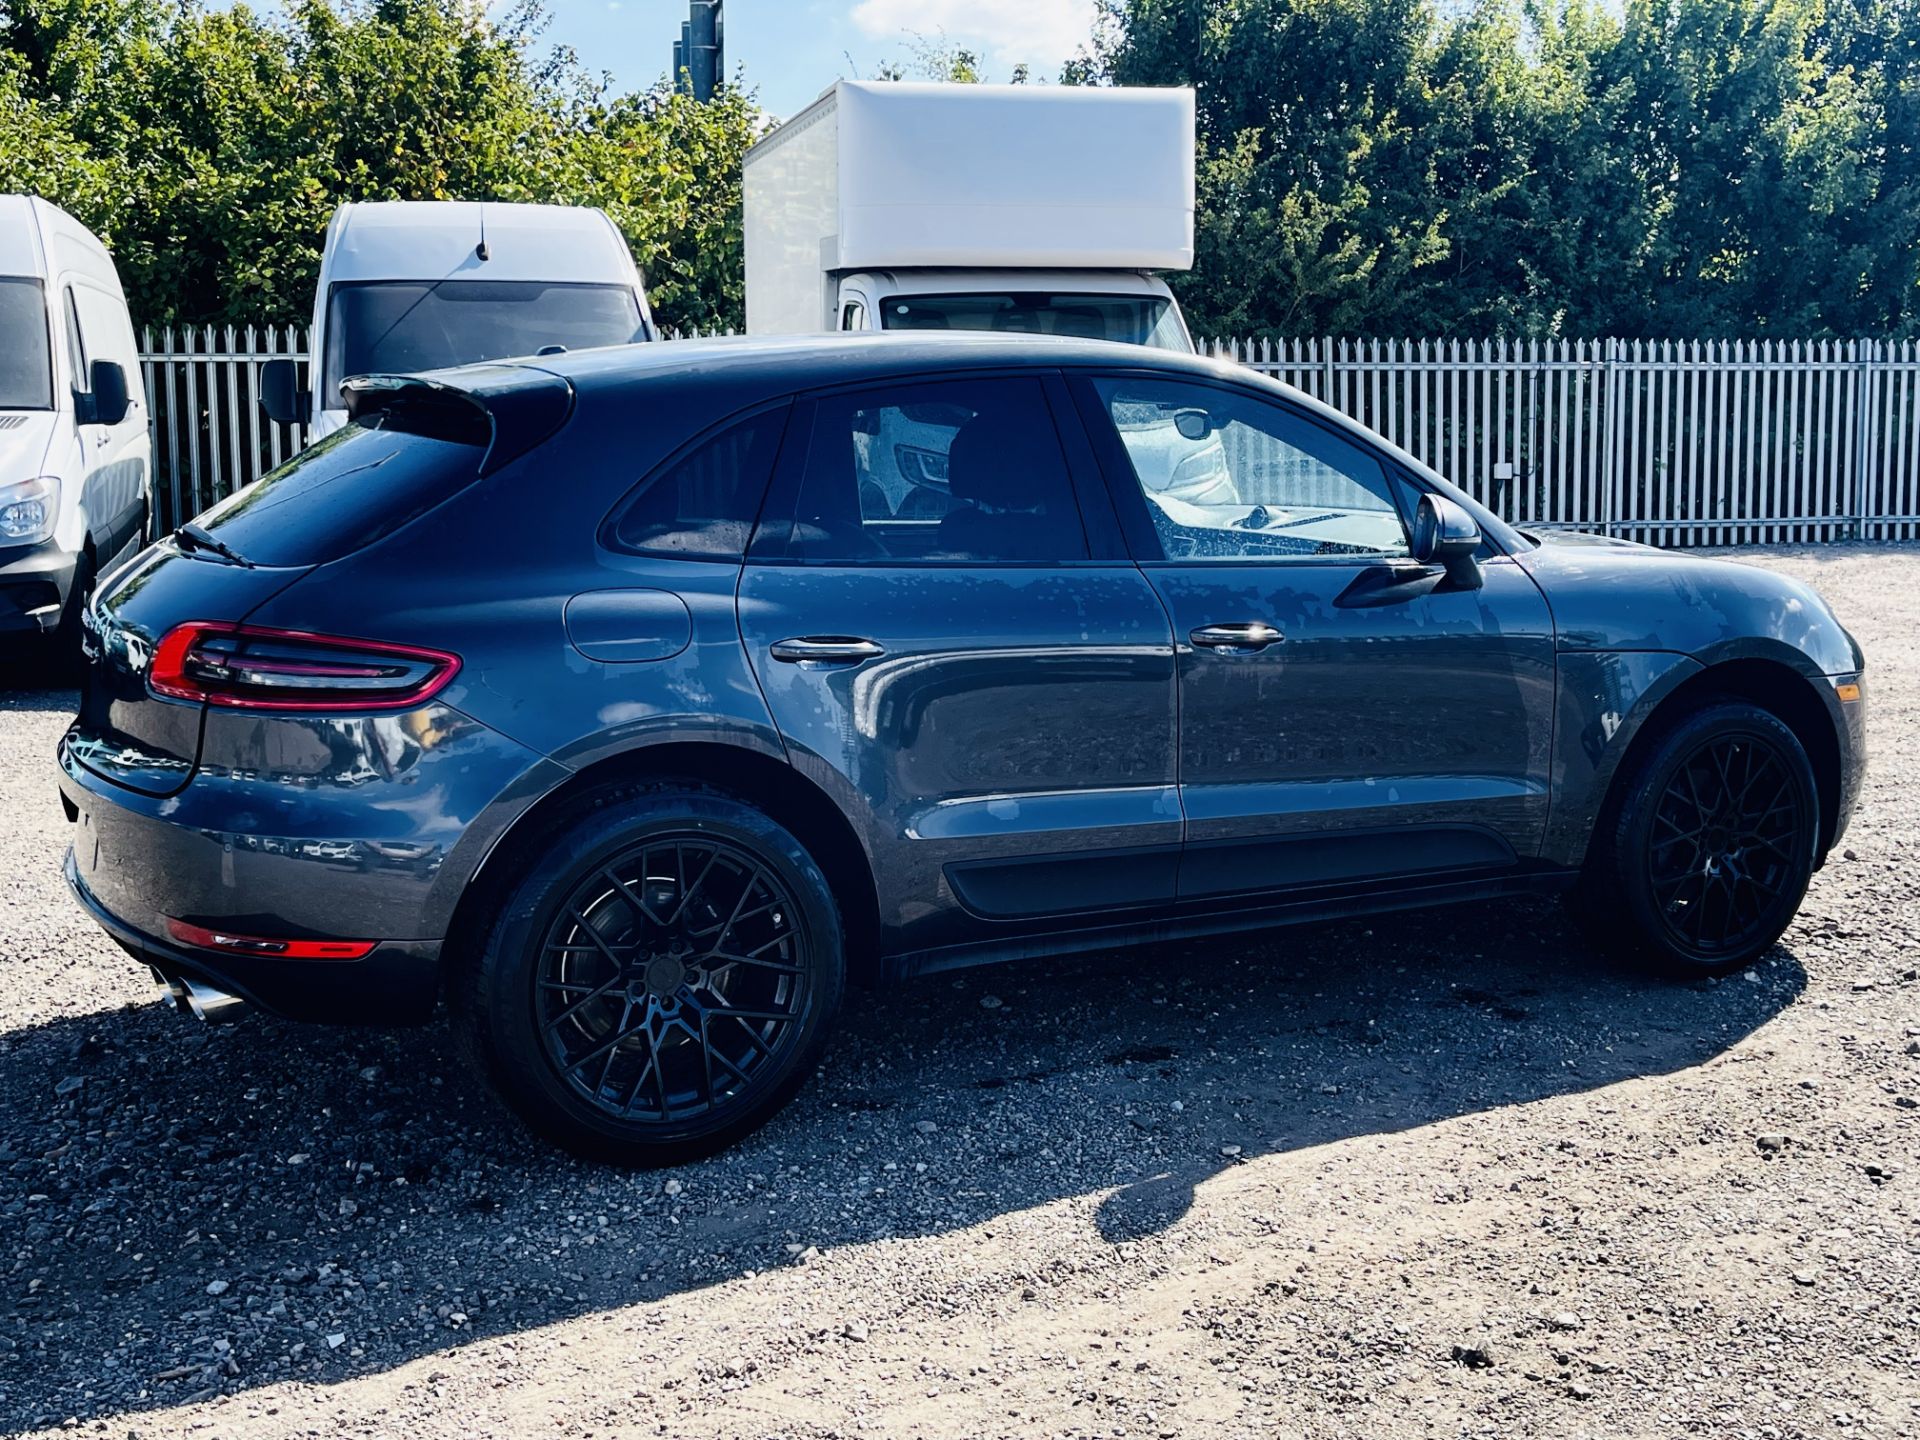 ** ON SALE ** Porsche Macan S 2.0L AWD PDK '2018 Year' Sat Nav - ULEZ Compliant - Only 54,624 Miles - Image 10 of 45